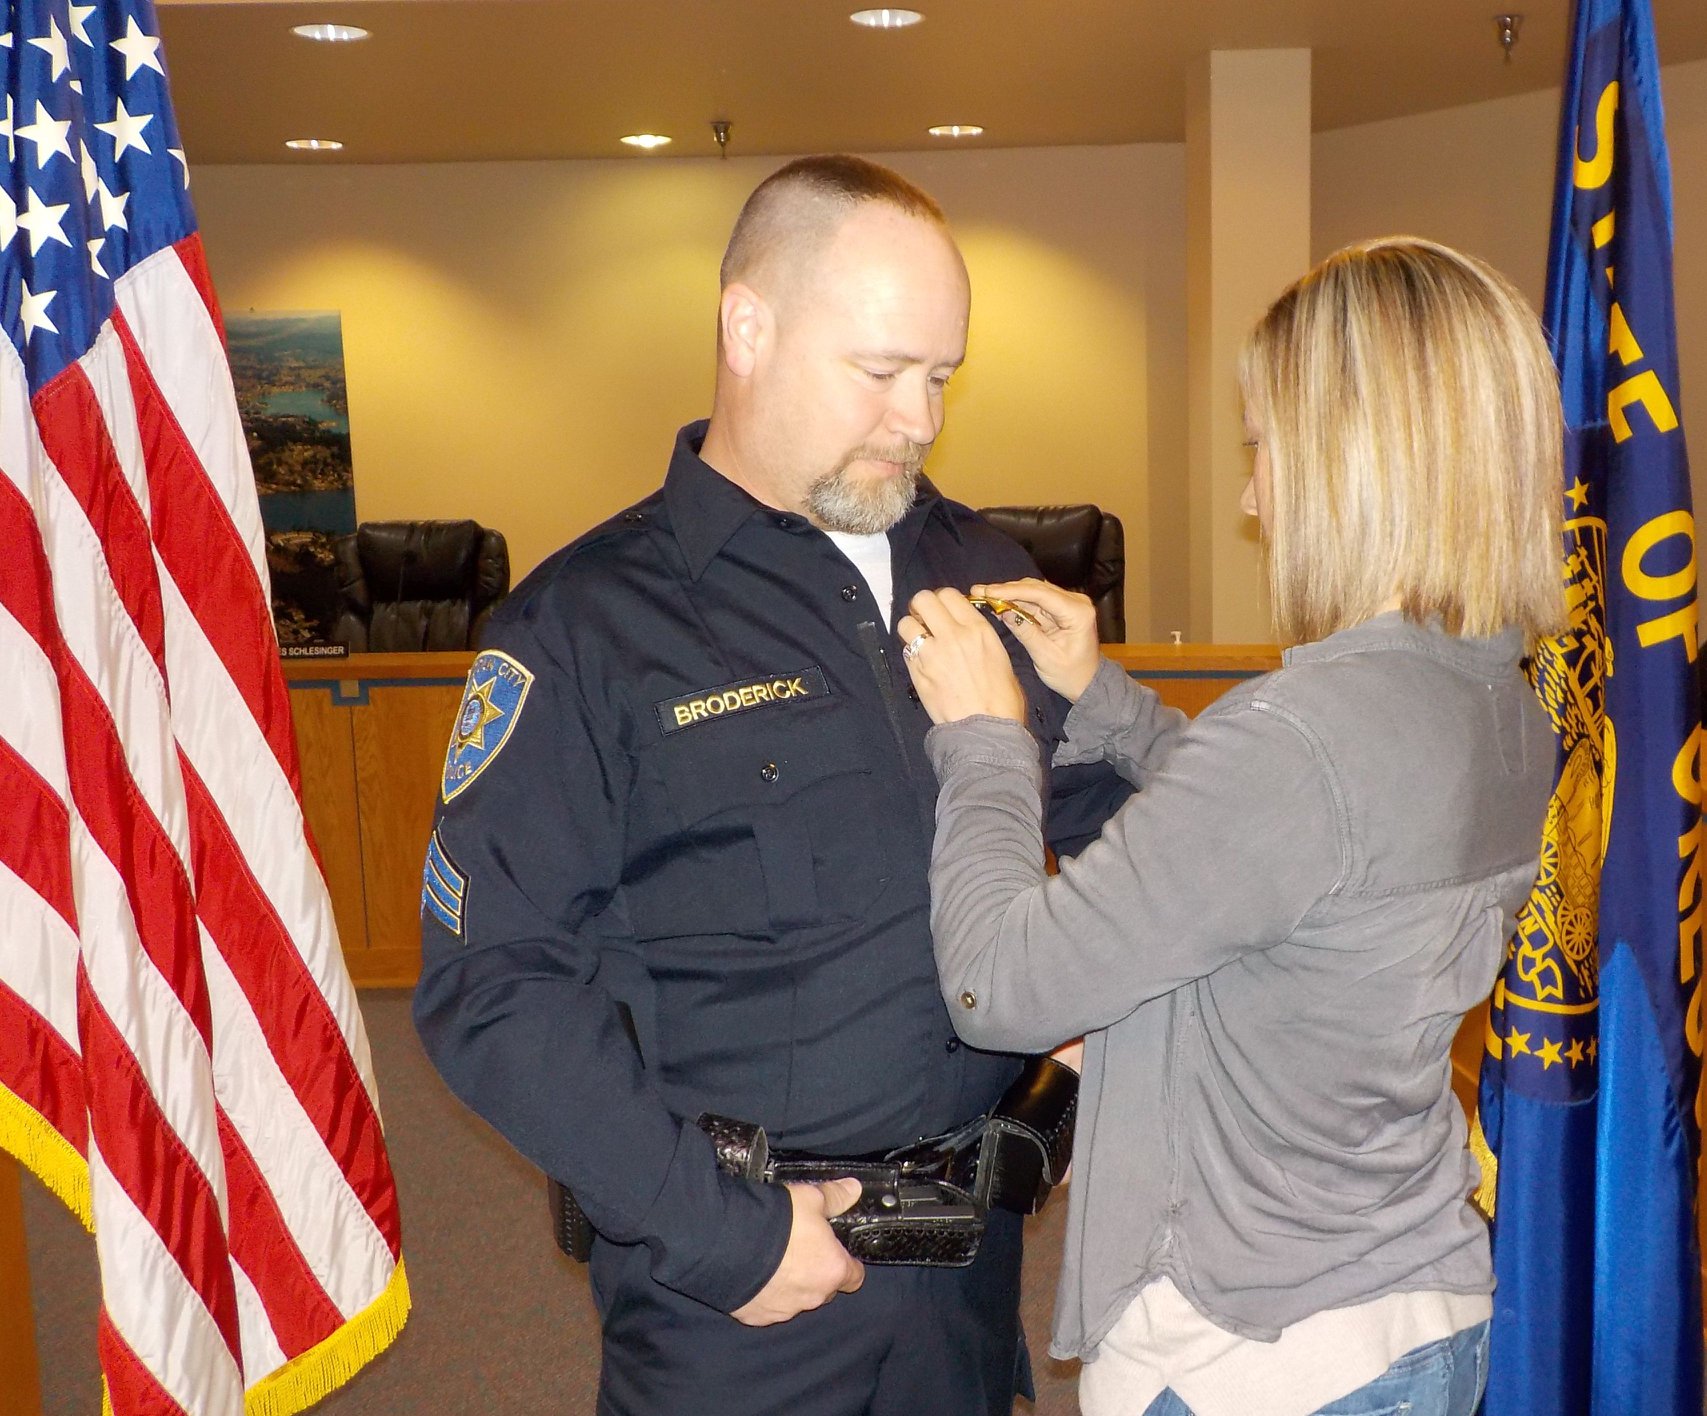 Sgt. Broderick receiving his badge from his wife Kristen.